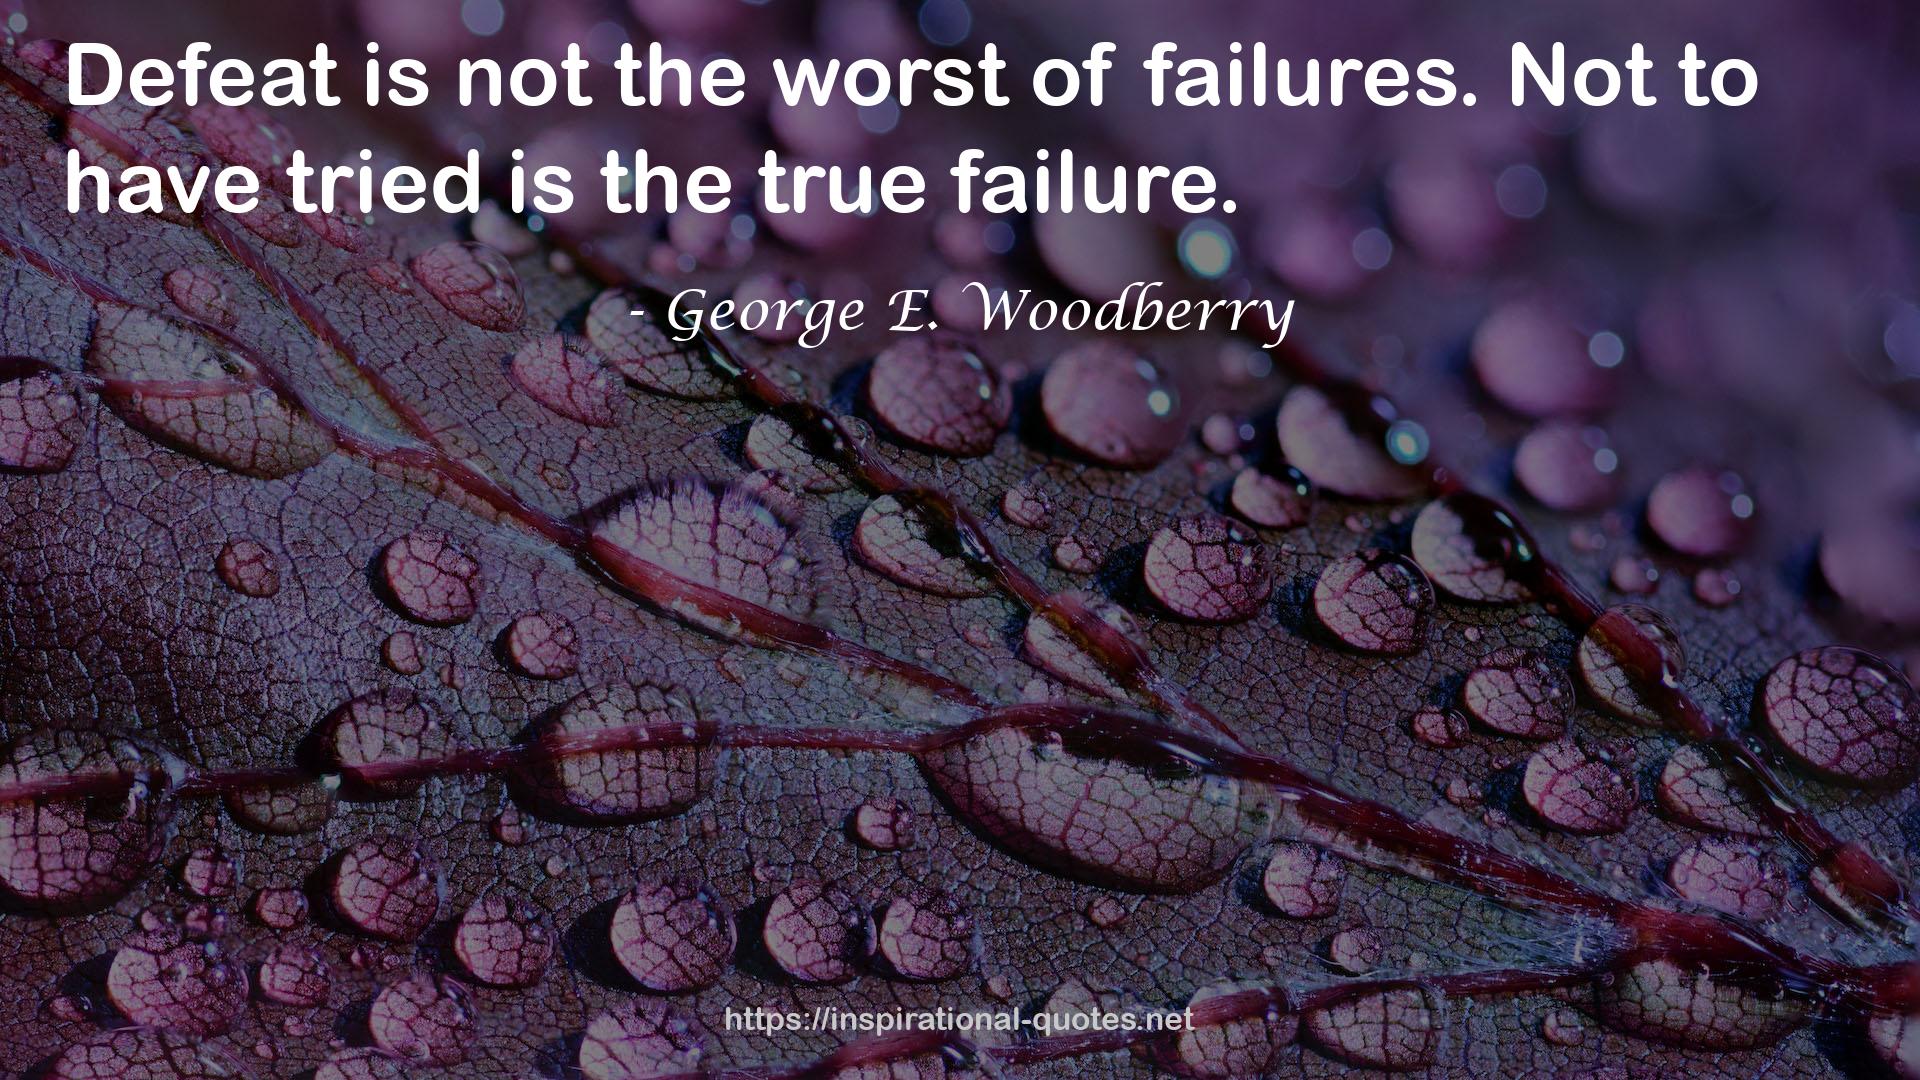 George E. Woodberry QUOTES